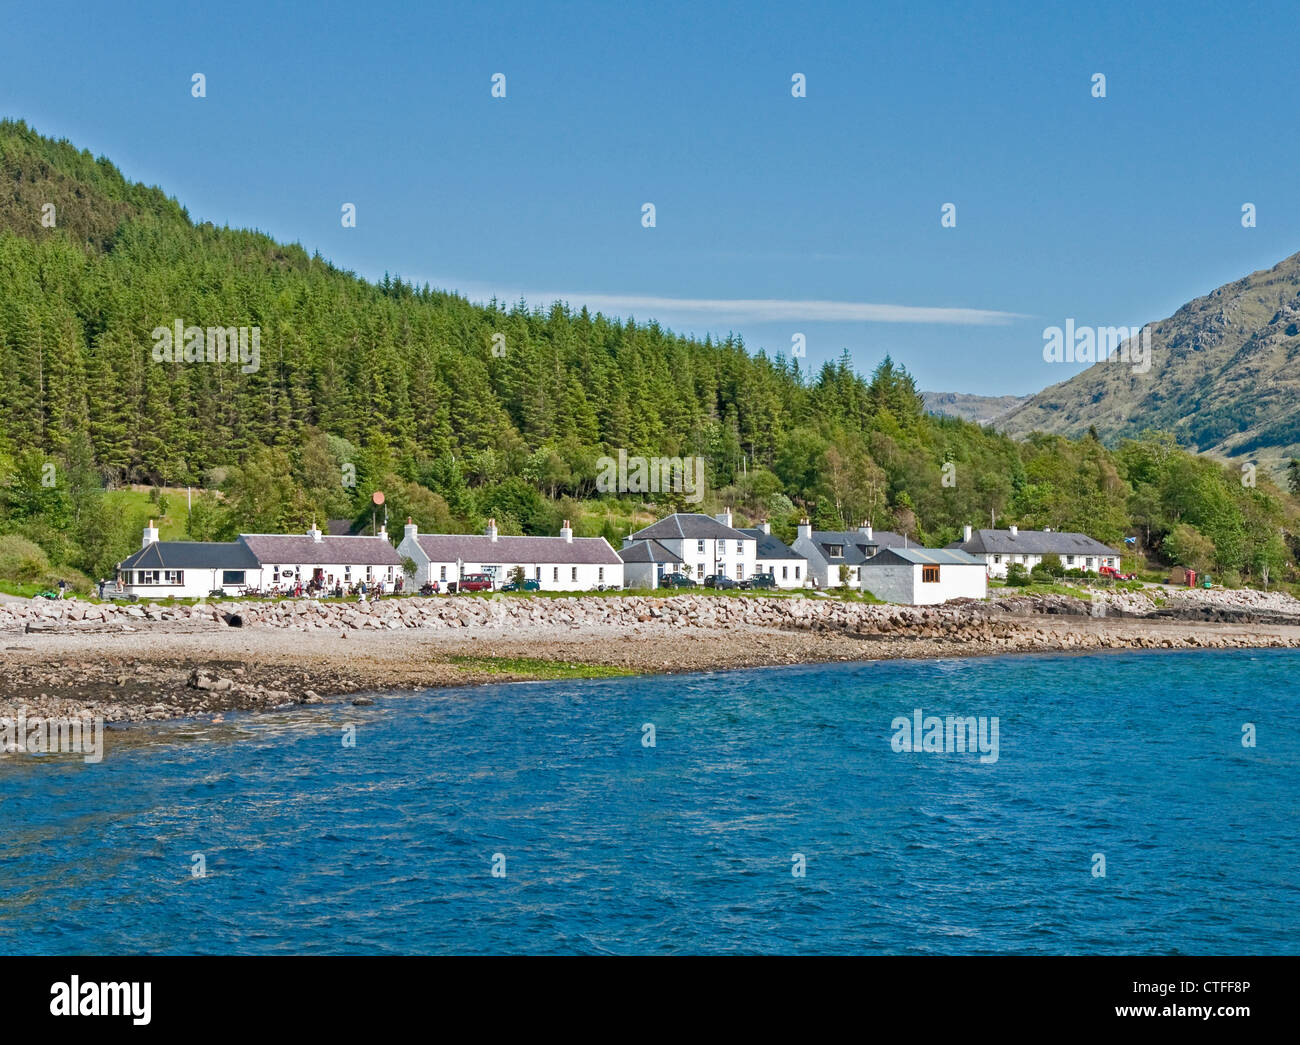 The village of Inverie in Inverie Bay Loch Nevis on Knoydart the West Highlands of Scotland Stock Photo